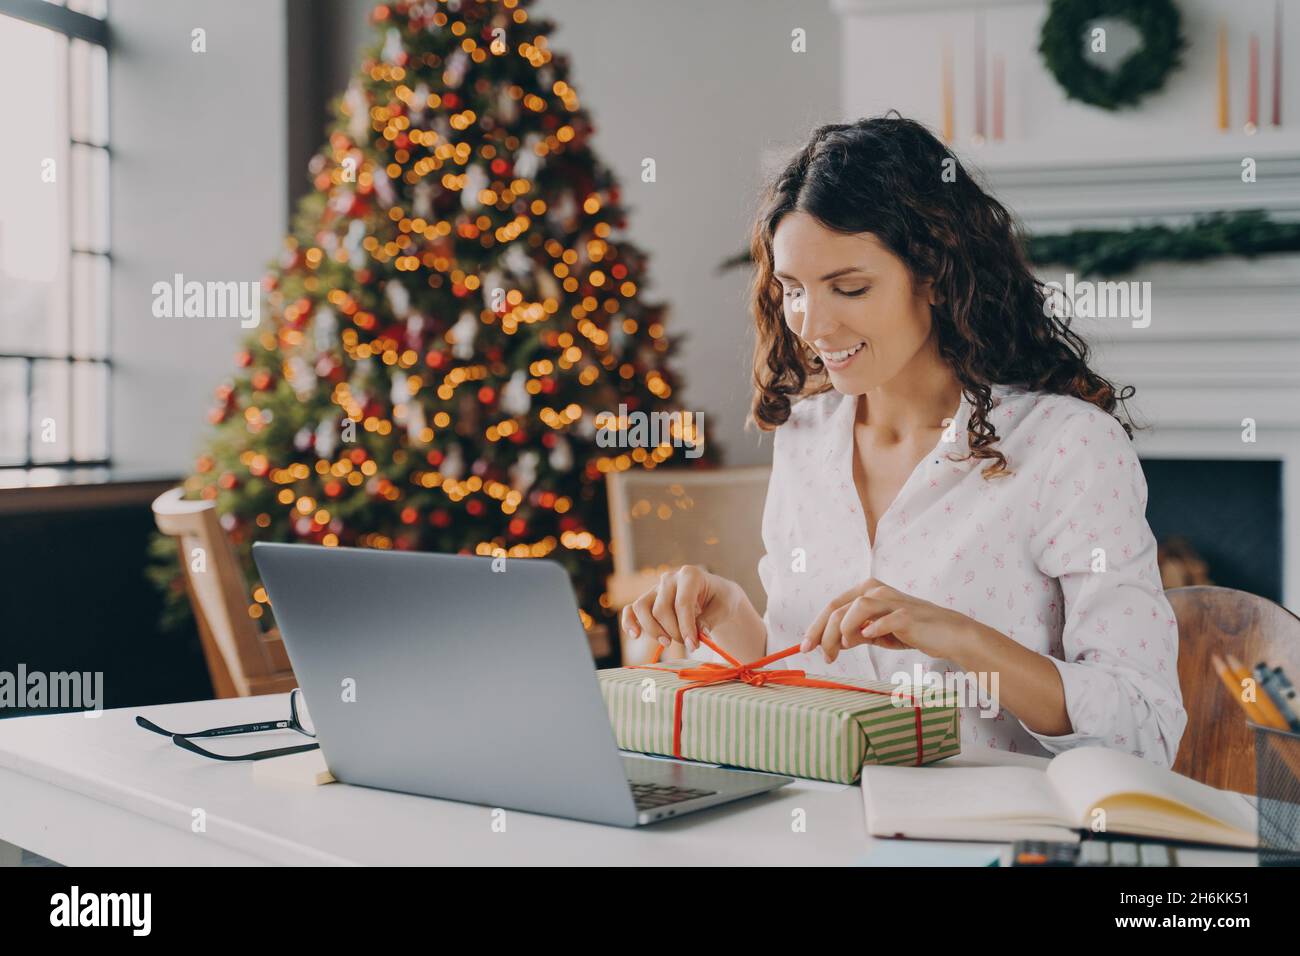 Beautiful Italian woman business lady decorating Xmas present at workplace during Christms holidays Stock Photo